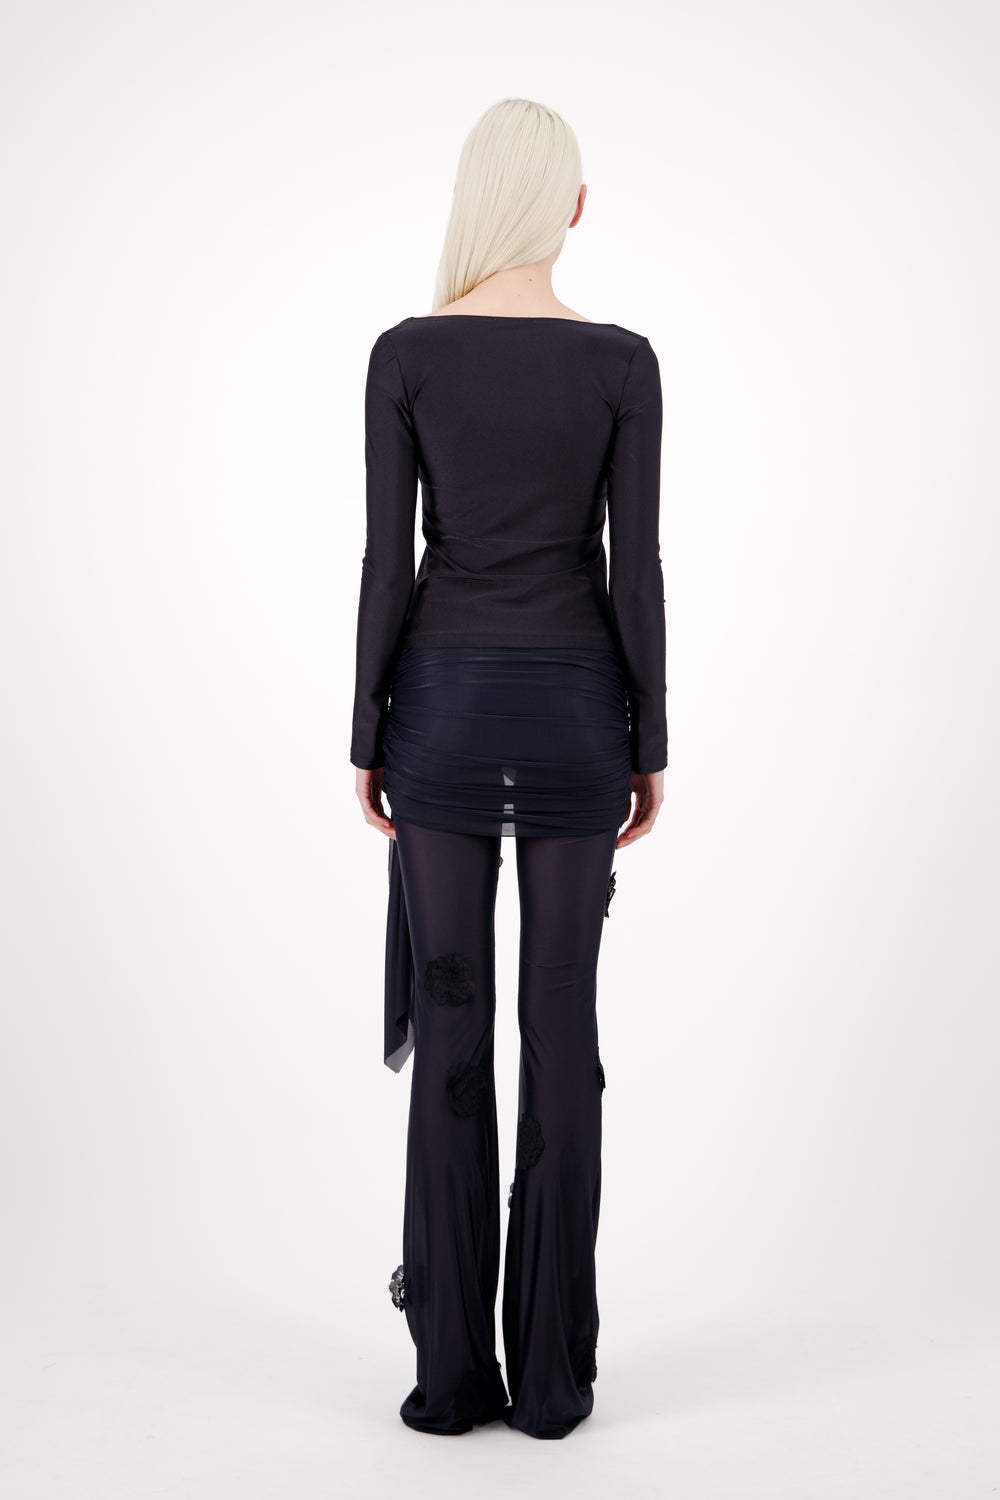 Fitted Long Sleeved  Black Top with Asymmetrical Lace detail